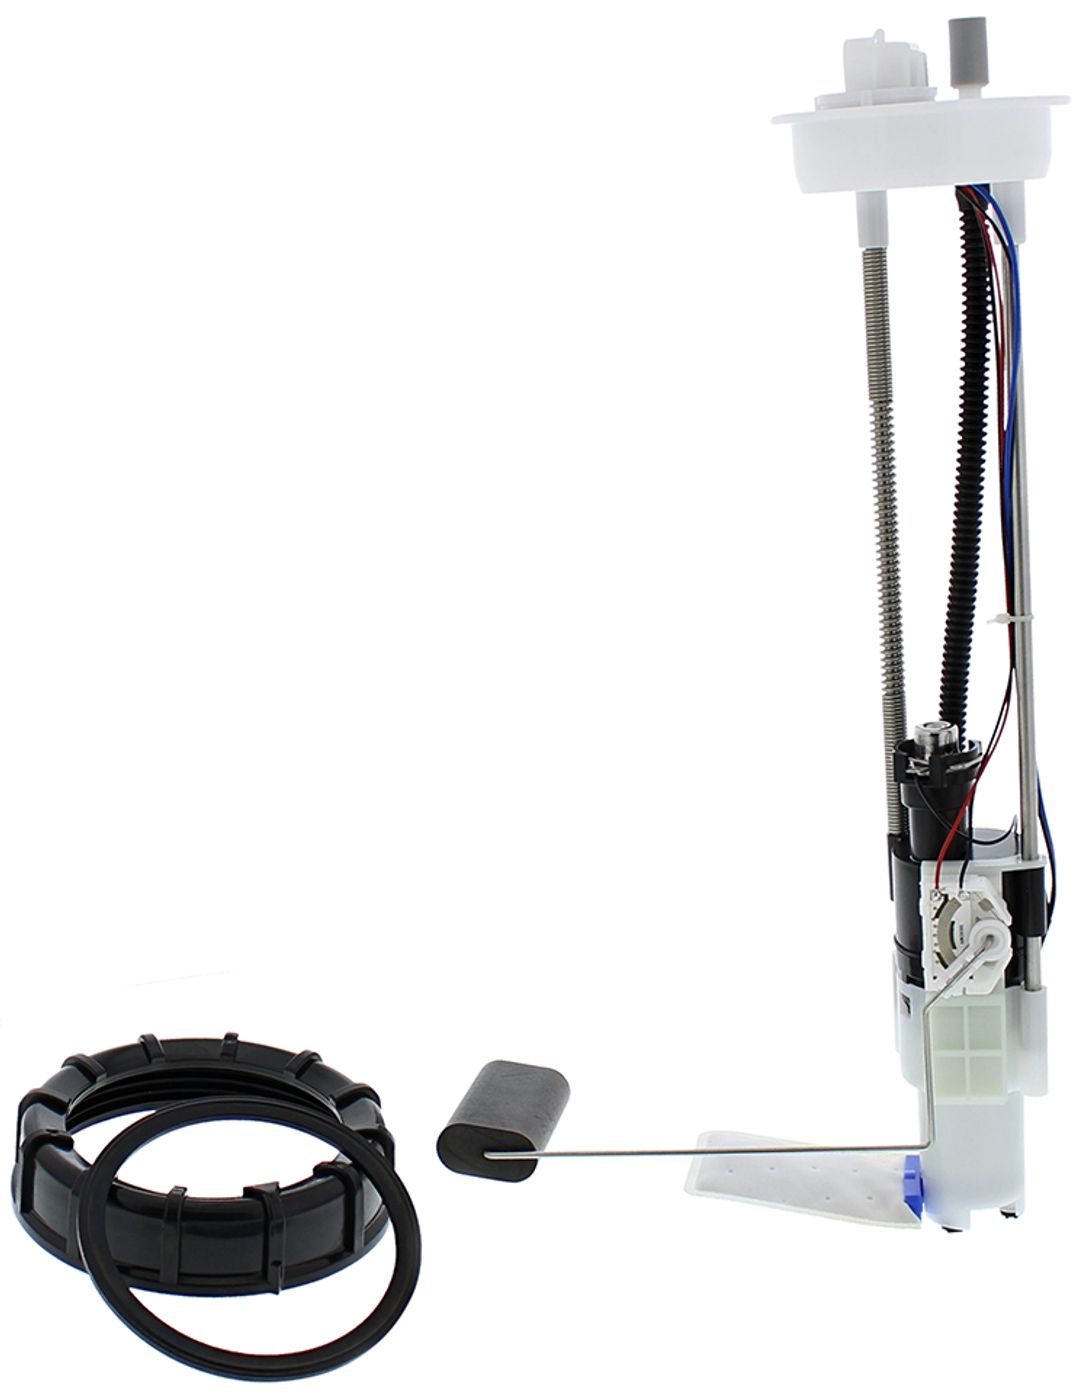 Wrp Fuel Pump Modules - WRP471012 image